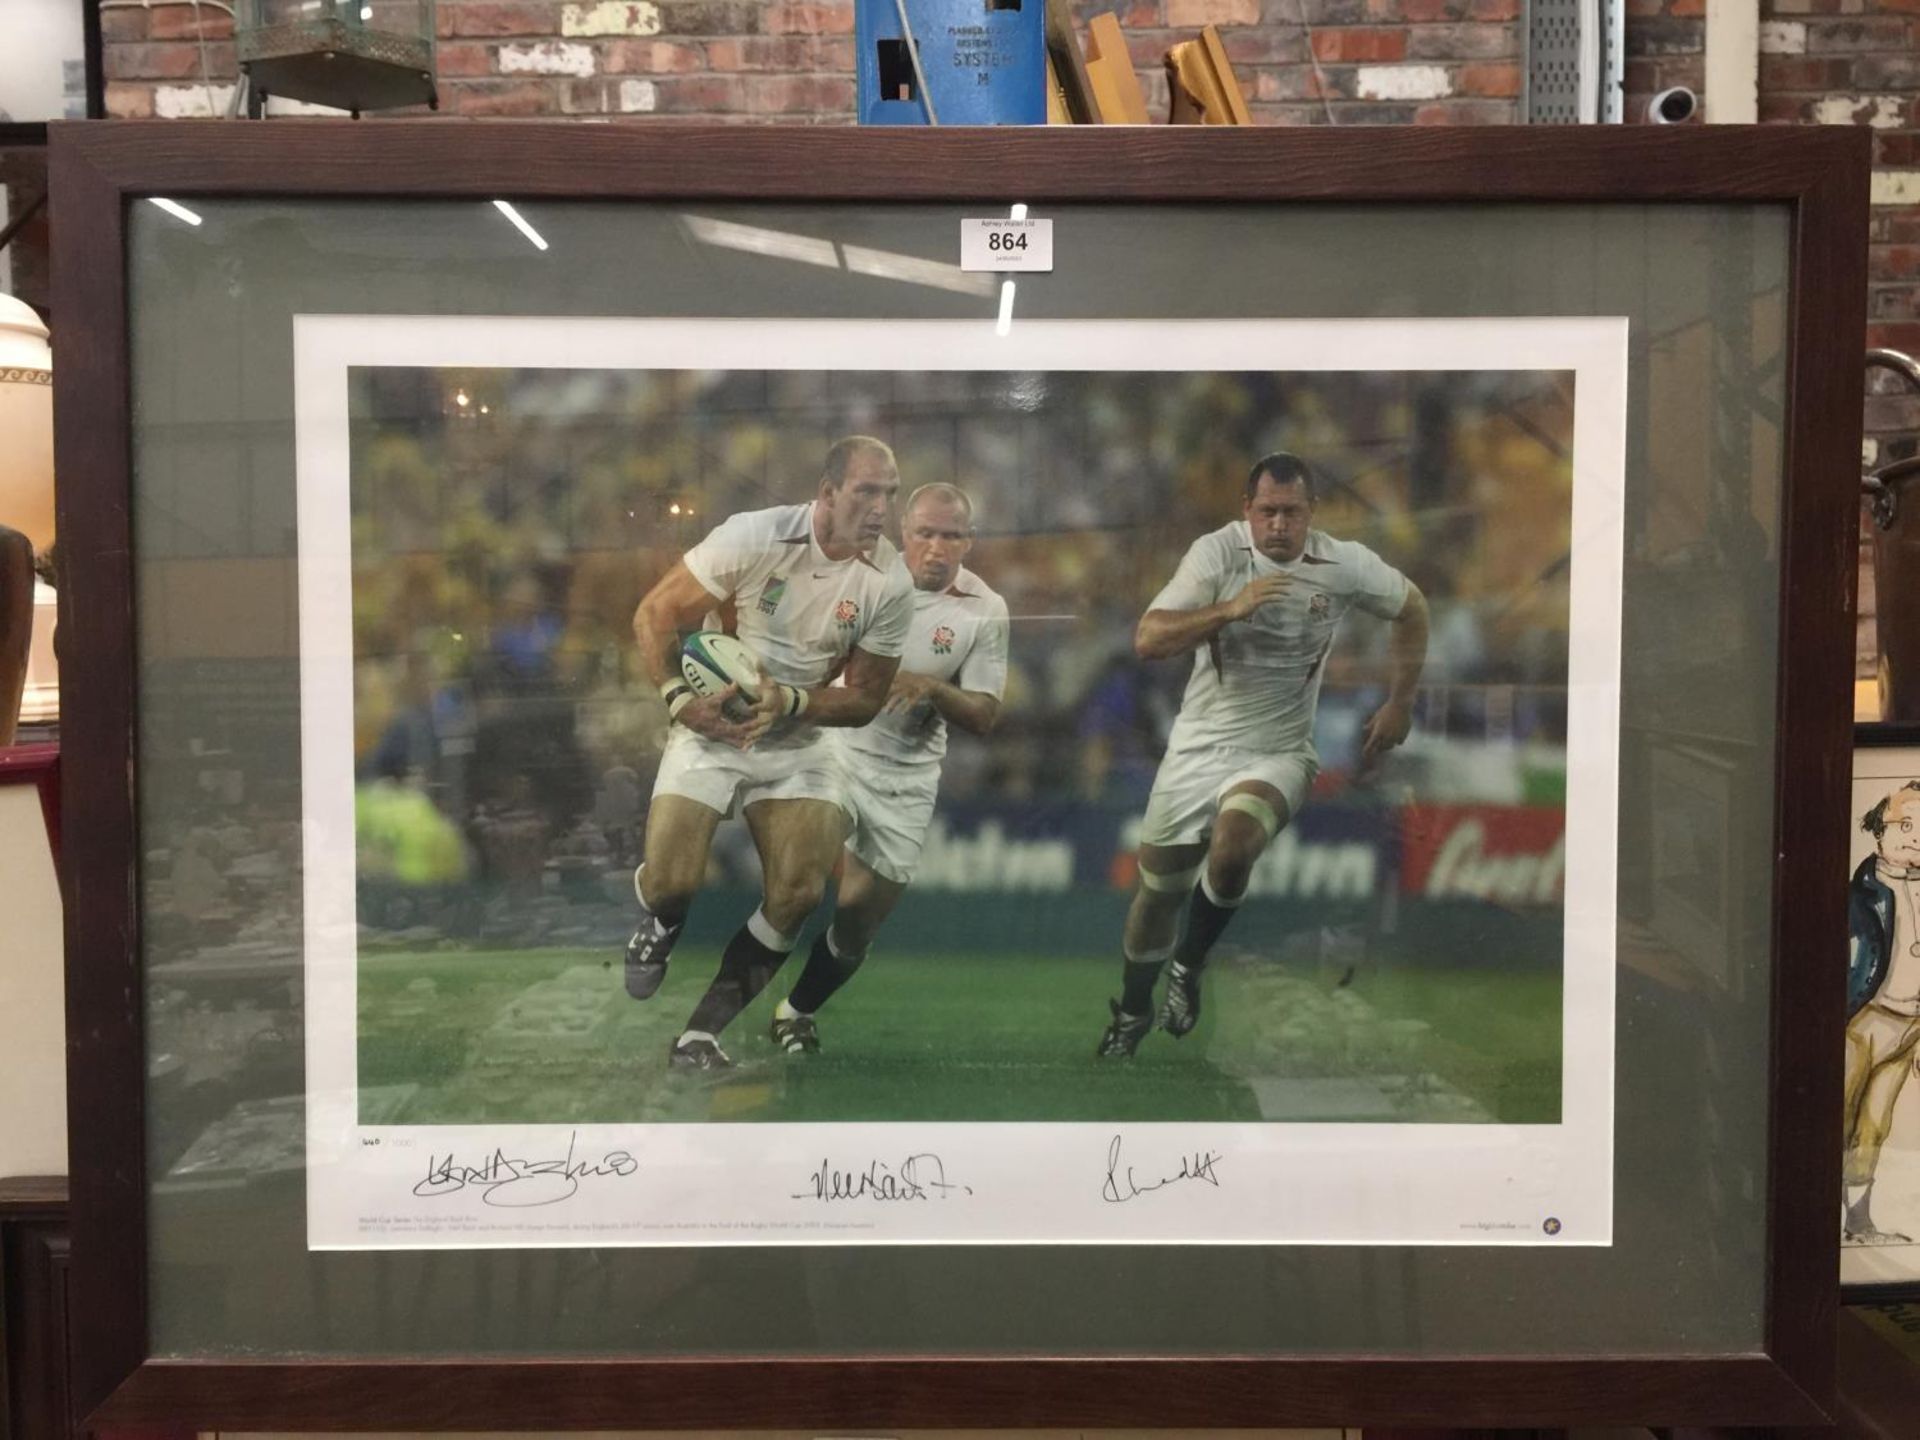 A LIMITED EDITION 440/1000 PRINT OF ENGLAND'S 20-17 VICTORY OVER AUSTRALIA IN THE FINAL OF THE RUGBY